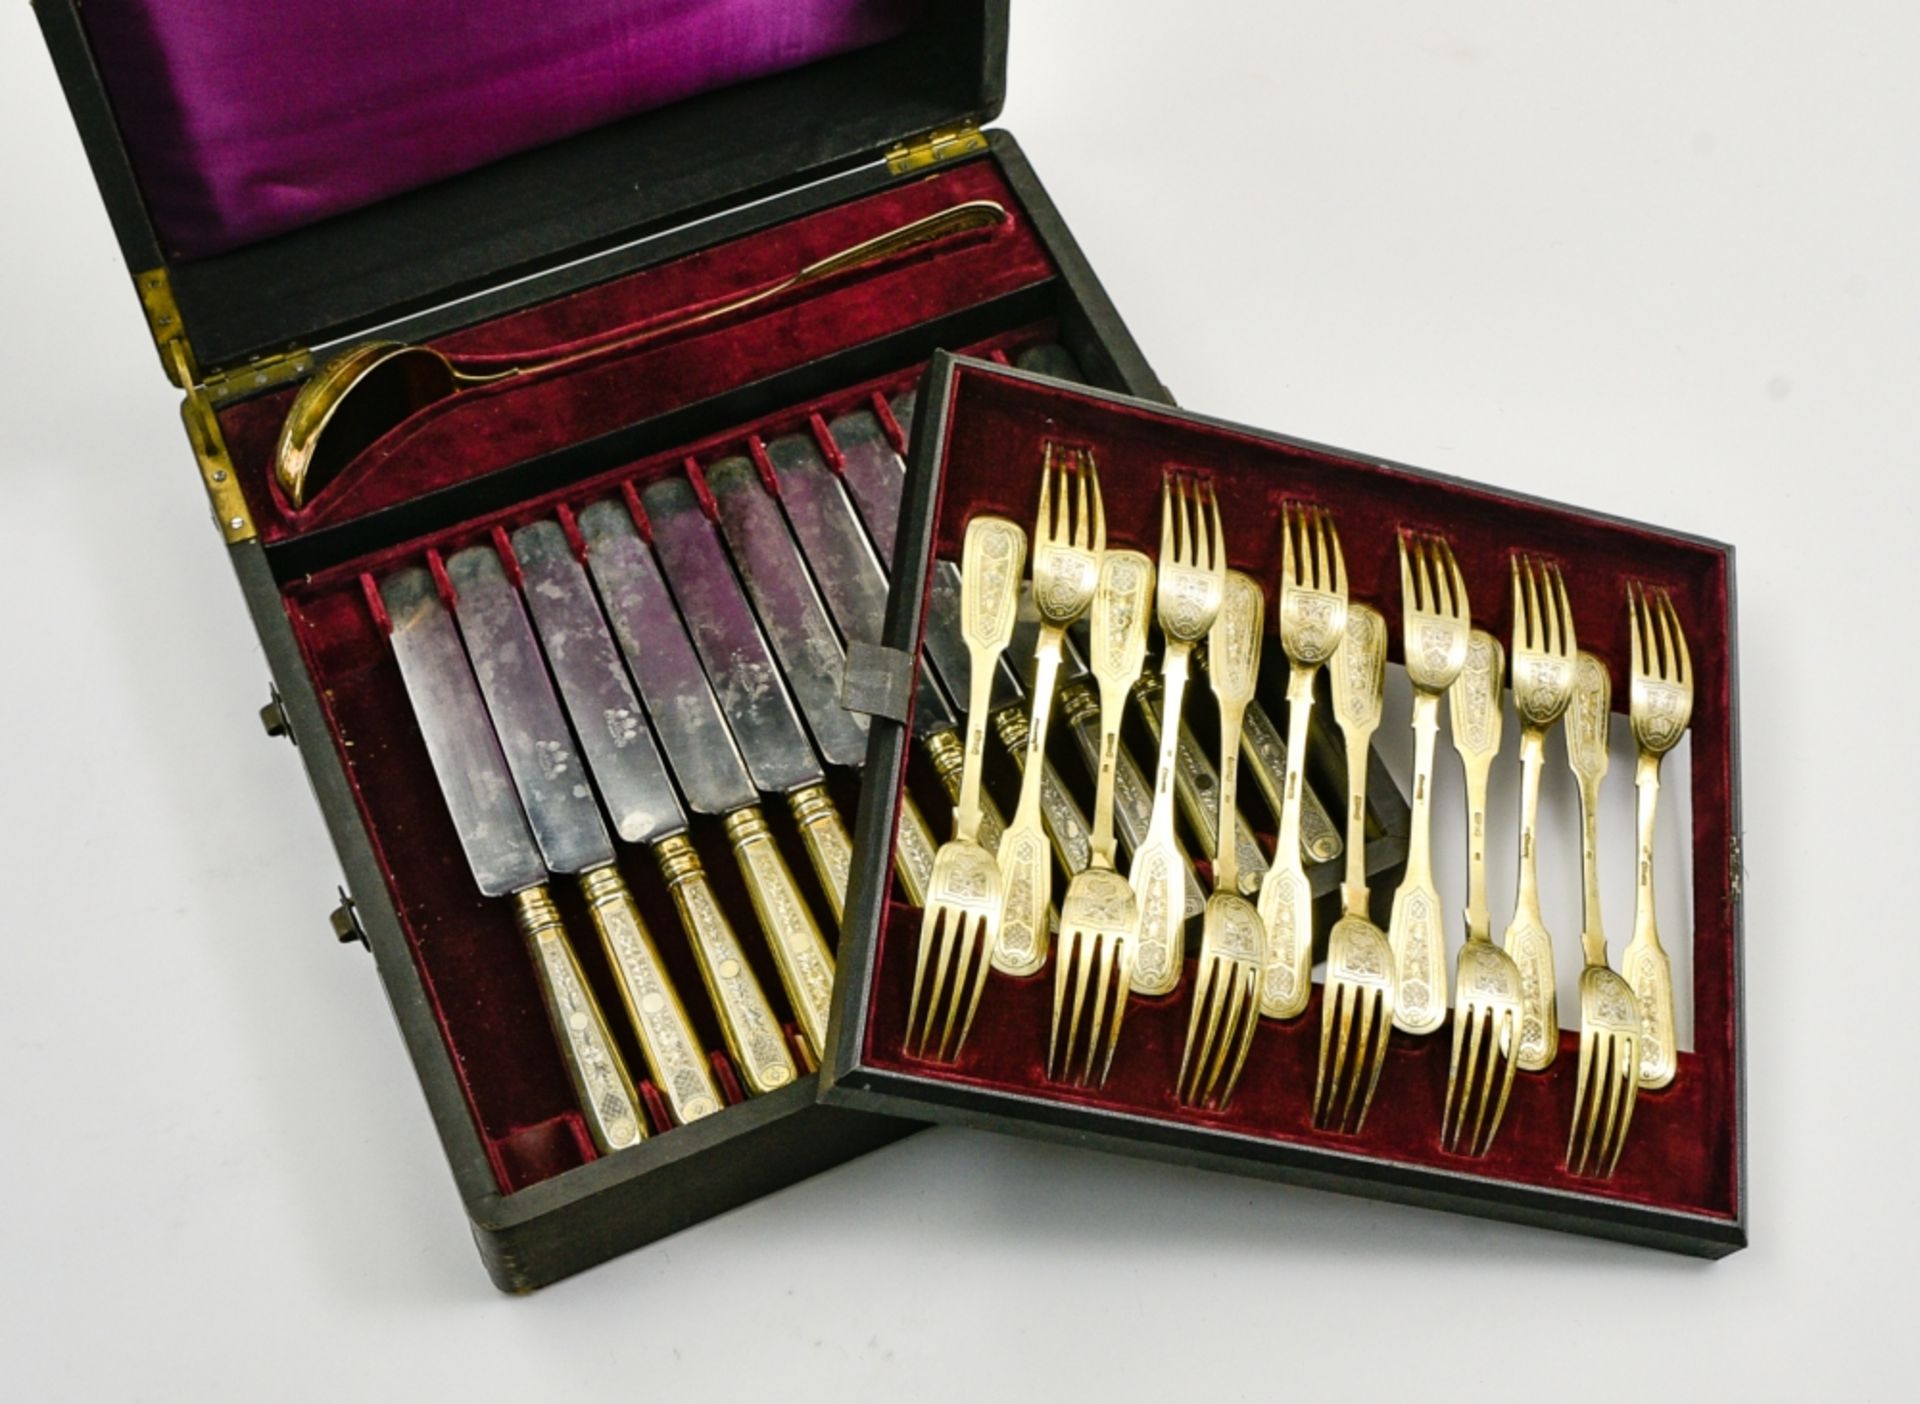 Part of a cutlery set MOSCOW, 1878 vermeil with engraved decor, composed of 12 forks, 11 knives, and - Image 4 of 4